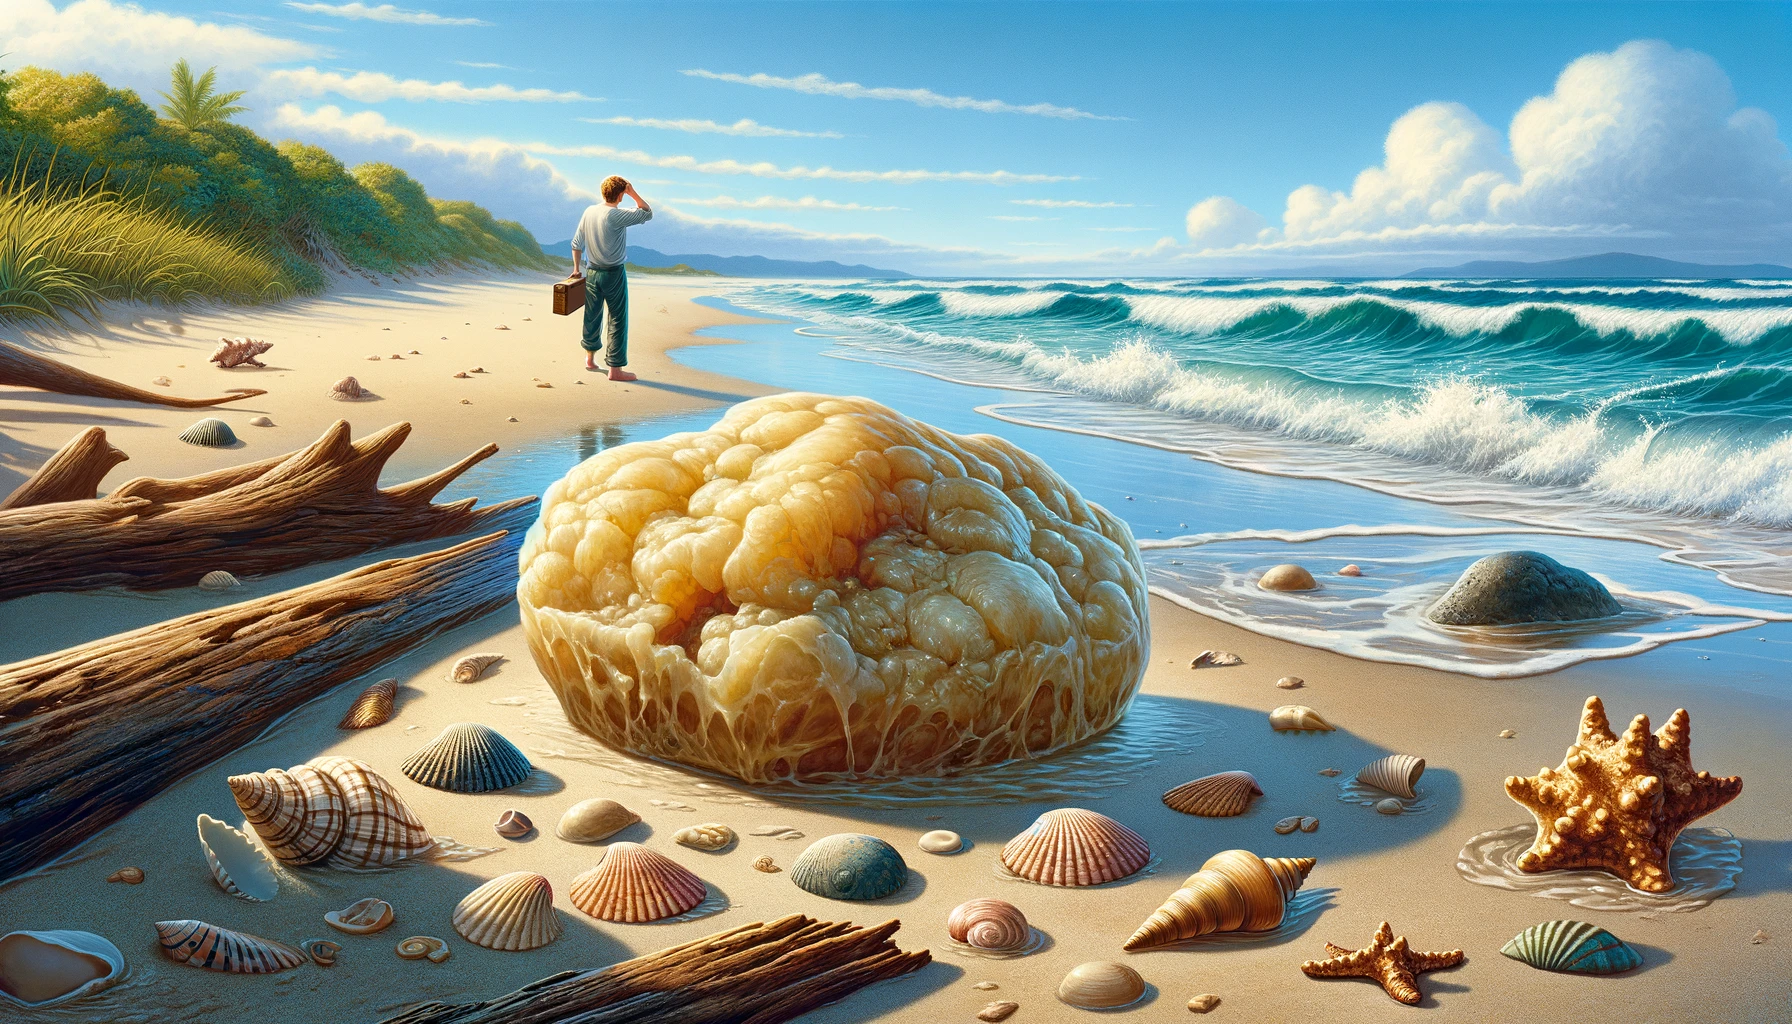 An image depicting the accidental discovery of ambergris on a beach. The scene captures a person, filled with surprise and curiosity, as they find a large, waxy piece of ambergris washed up on the sandy shore. The beach setting is picturesque, with the ocean waves gently crashing in the background and a clear blue sky overhead. The ambergris is shown as a peculiar, lump-like object, lying amidst seashells and driftwood, making it stand out as an unusual find. The overall atmosphere of the image conveys a sense of wonder and the unexpected treasure that the ocean can bring to those who explore its shores.